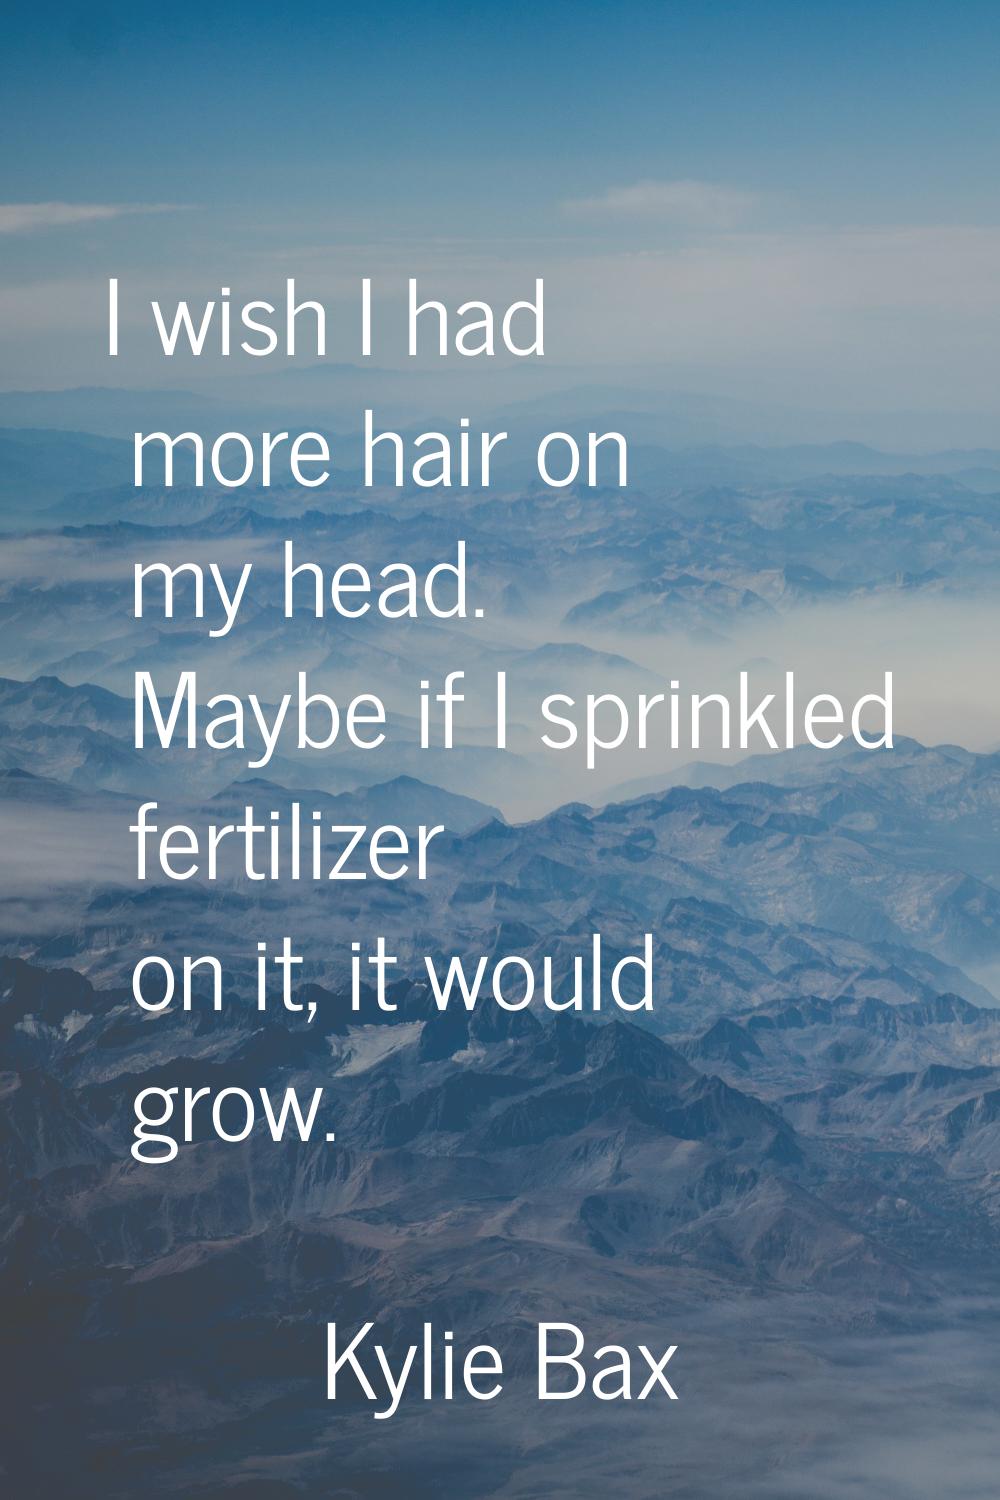 I wish I had more hair on my head. Maybe if I sprinkled fertilizer on it, it would grow.